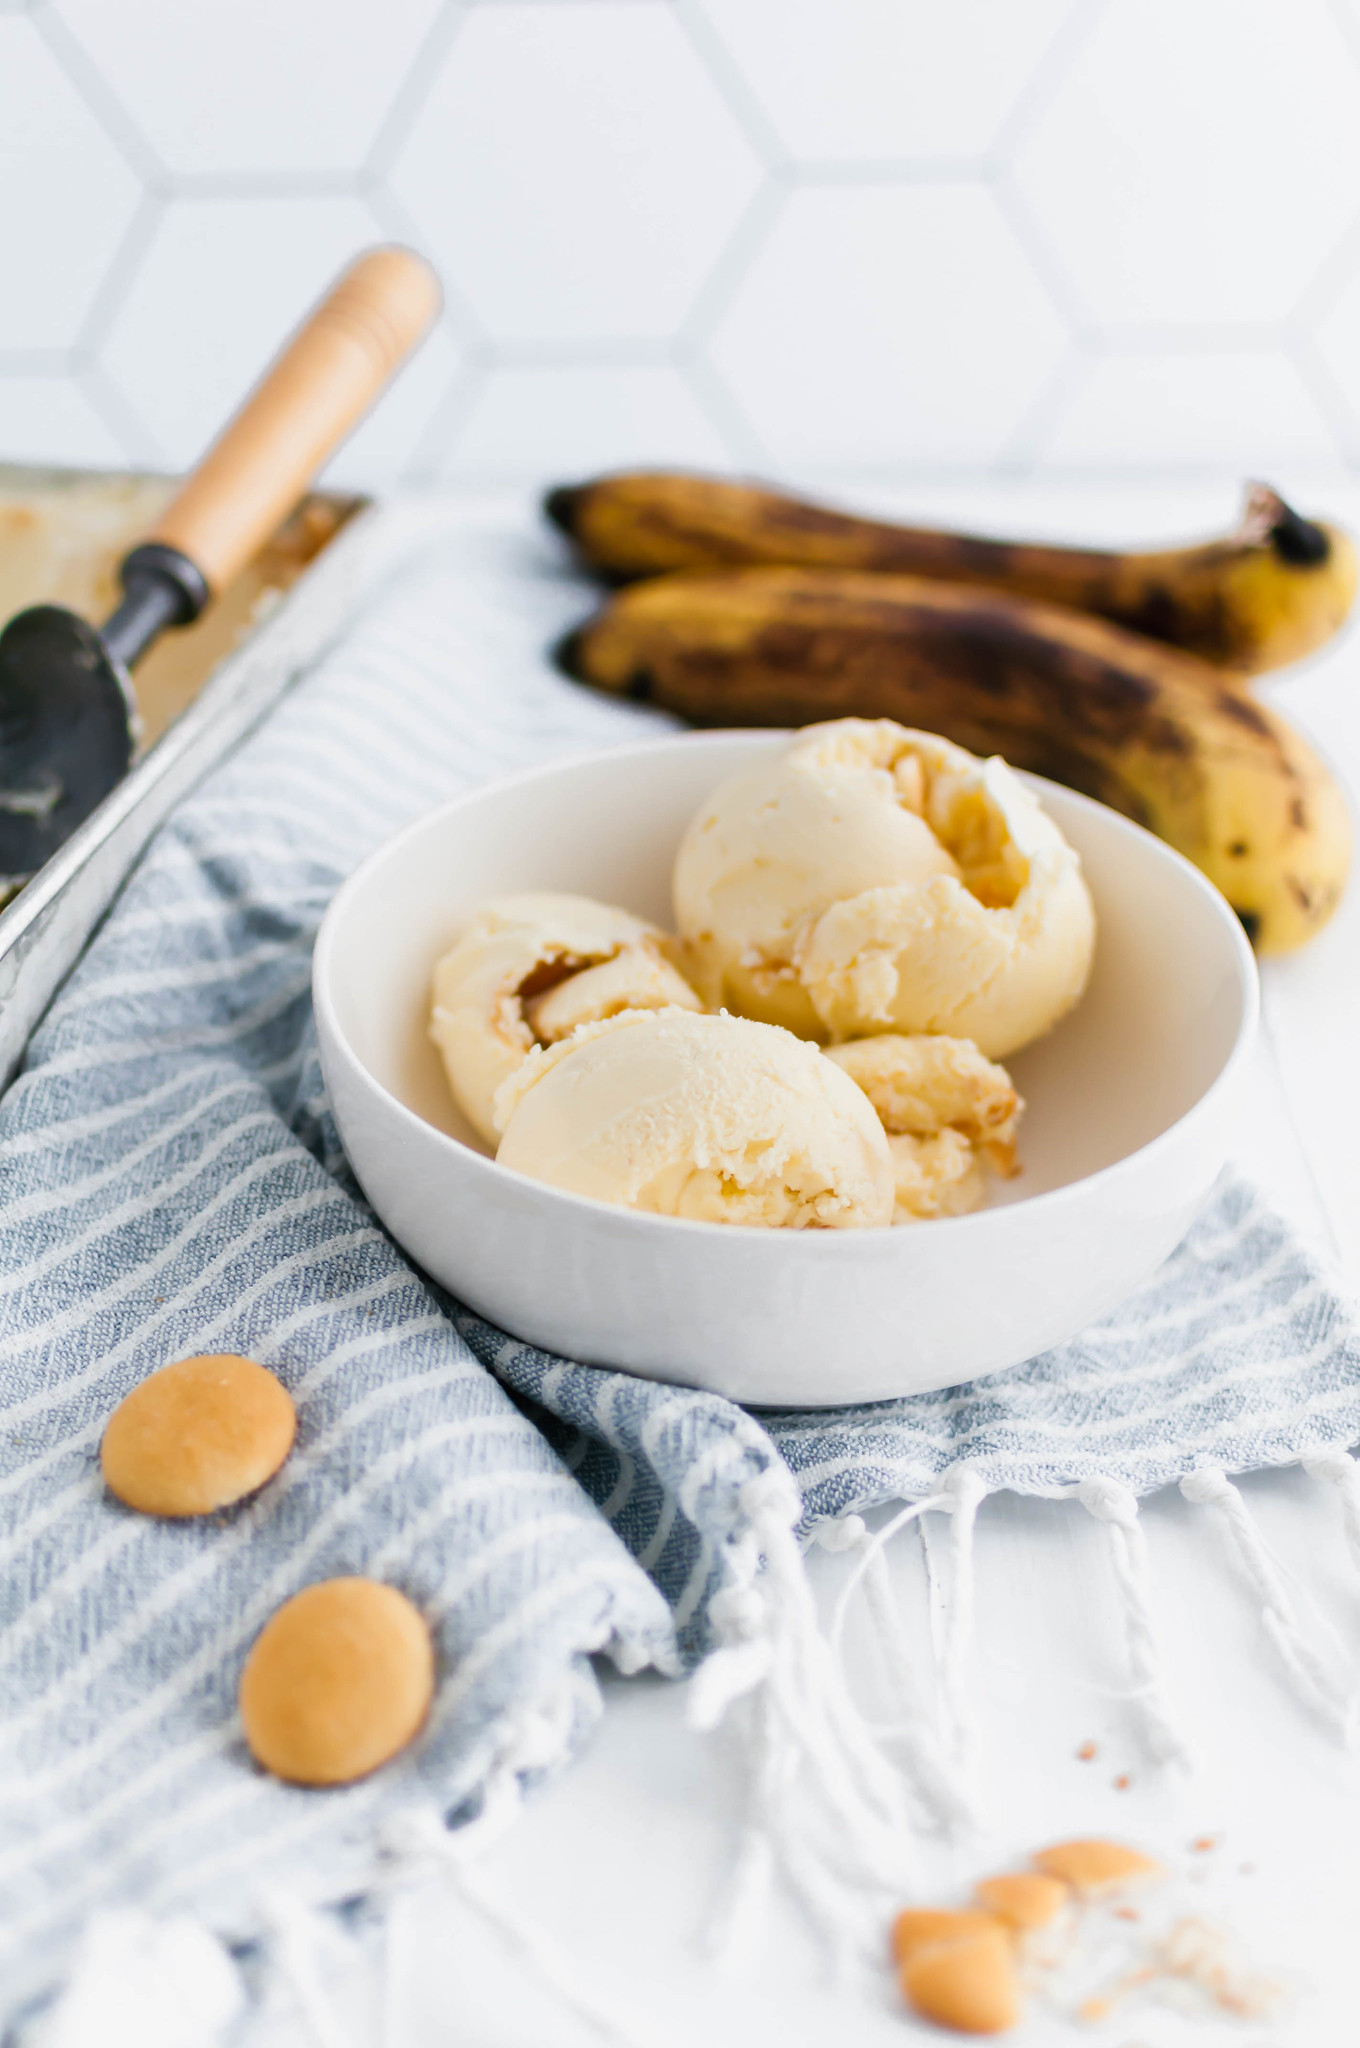 This Banana Pudding Ice Cream is a fun spin on the classic dessert. Banana pudding, fresh bananas and Nilla wafers combine to create a creamy, fruity ice cream perfect for the end of summer.